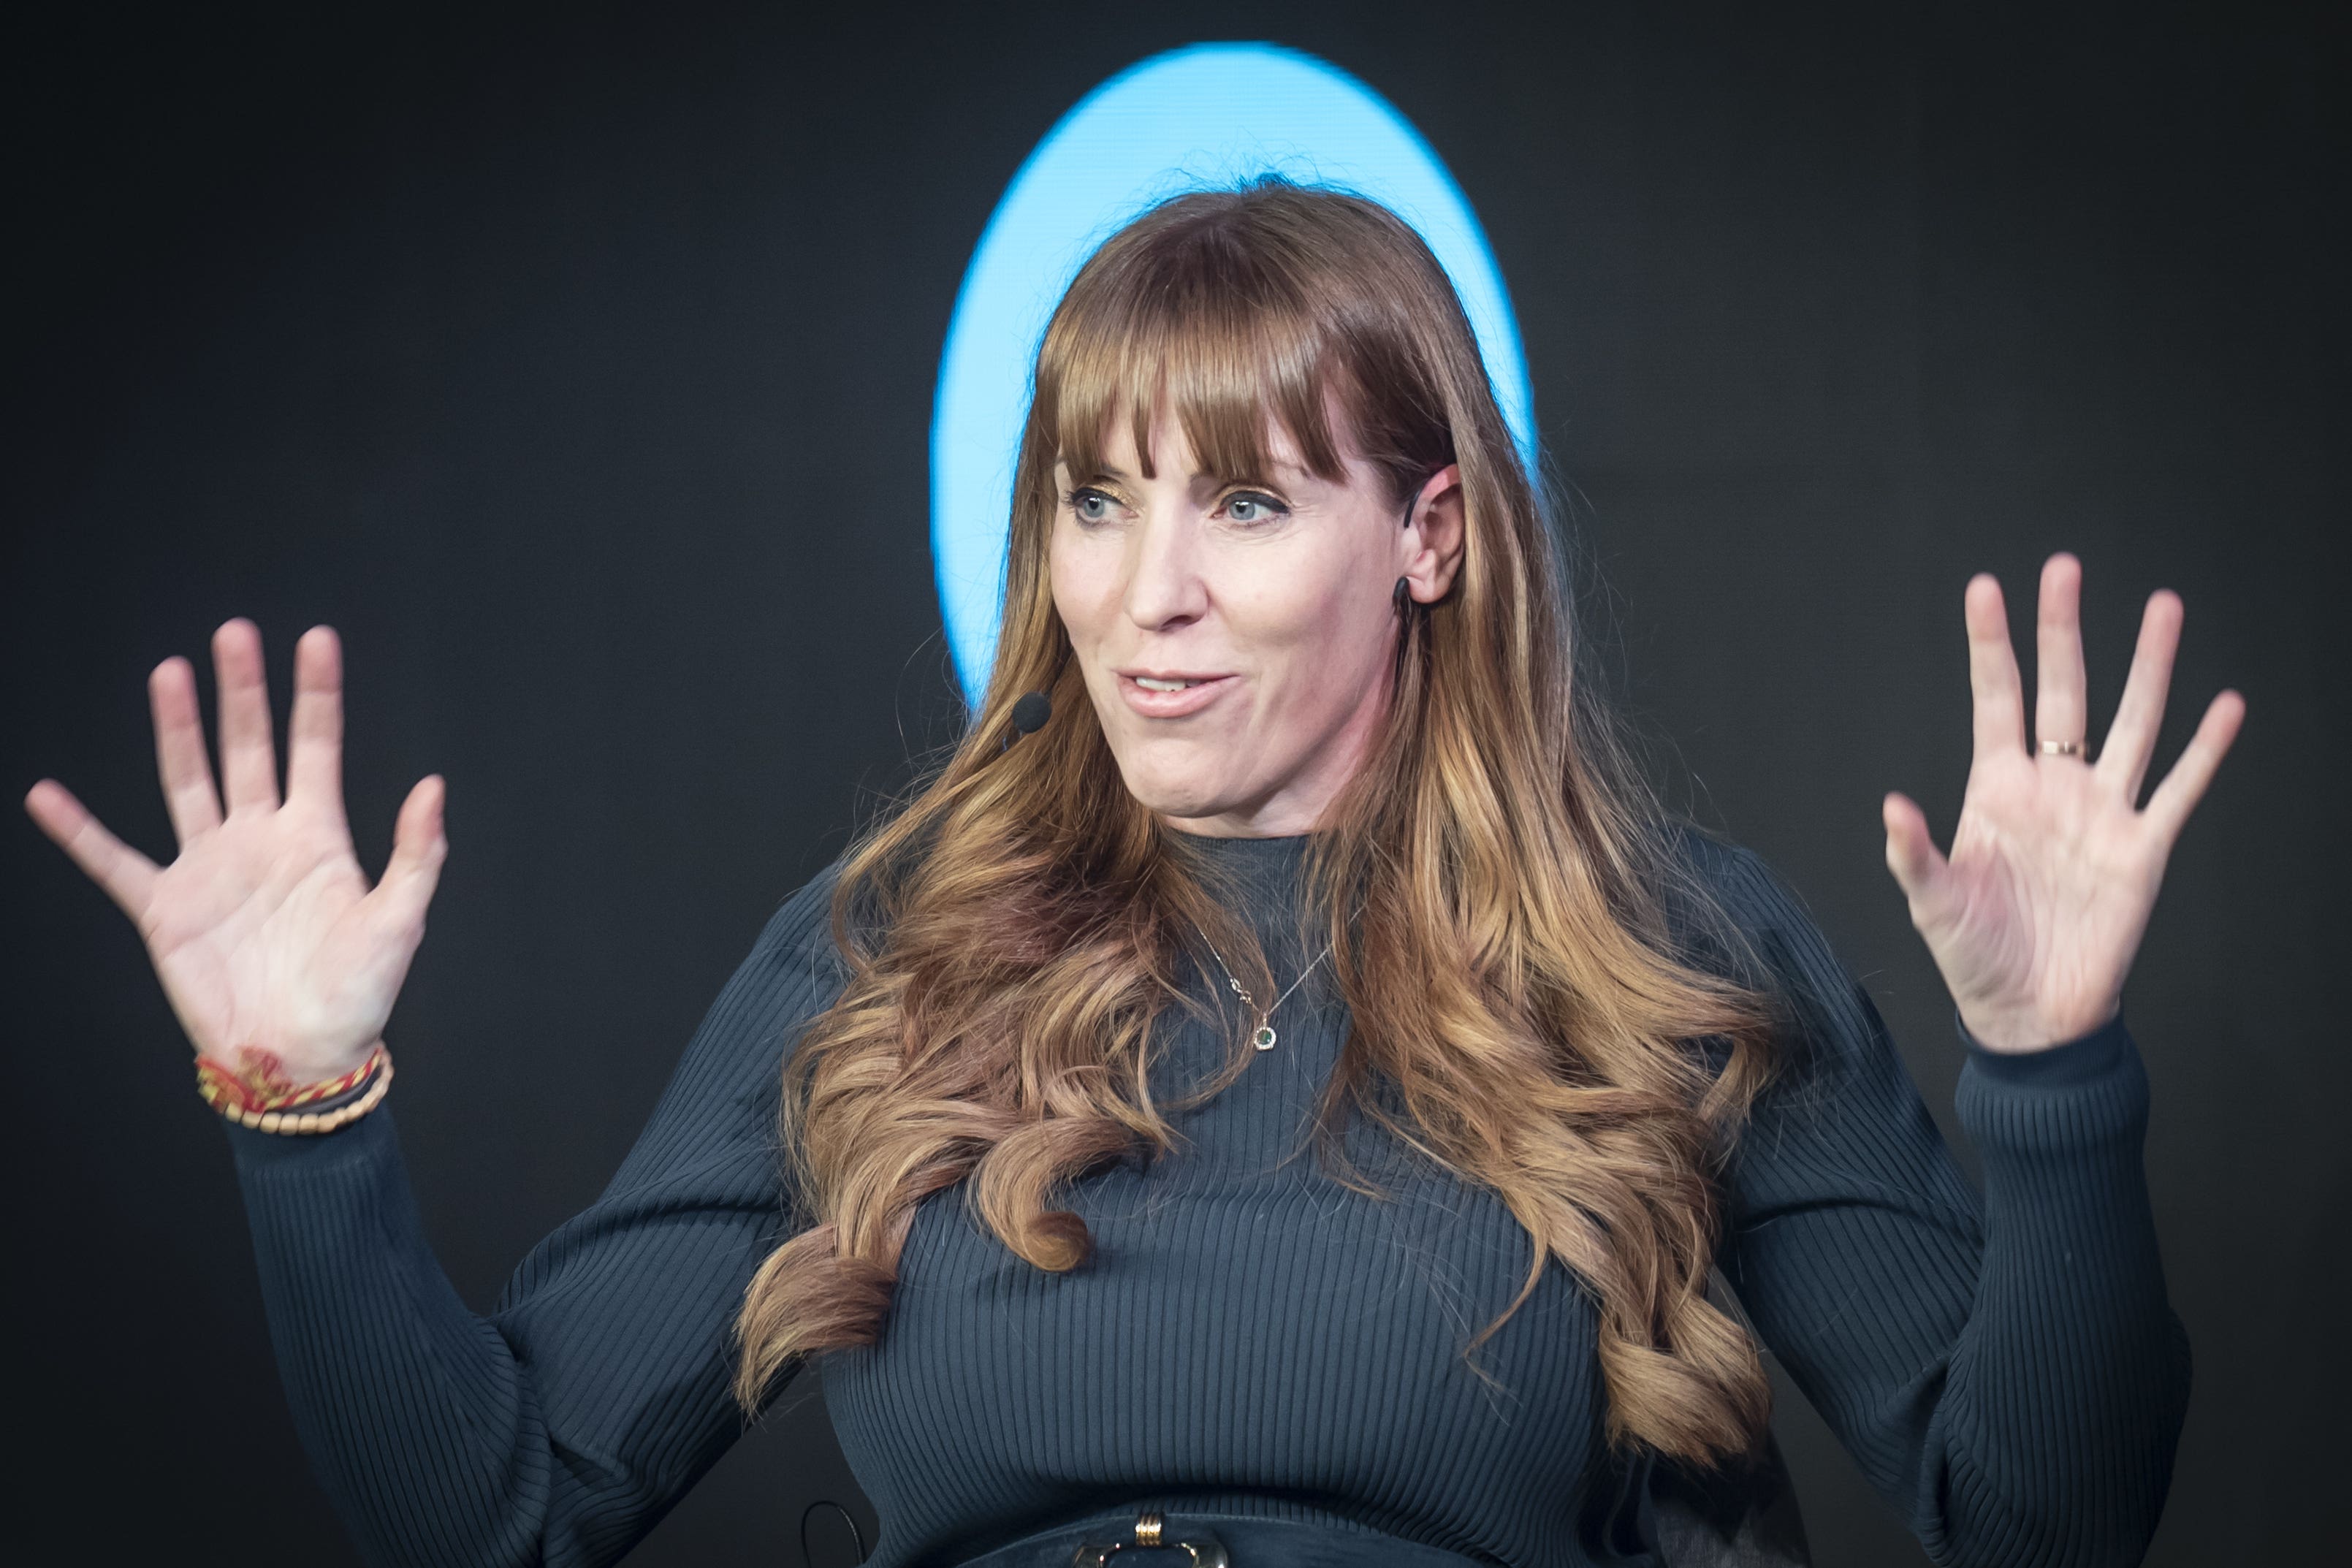 Deputy Labour Party leader Angela Rayner has insisted there was no wrongdoing in her sale of her Stockport property